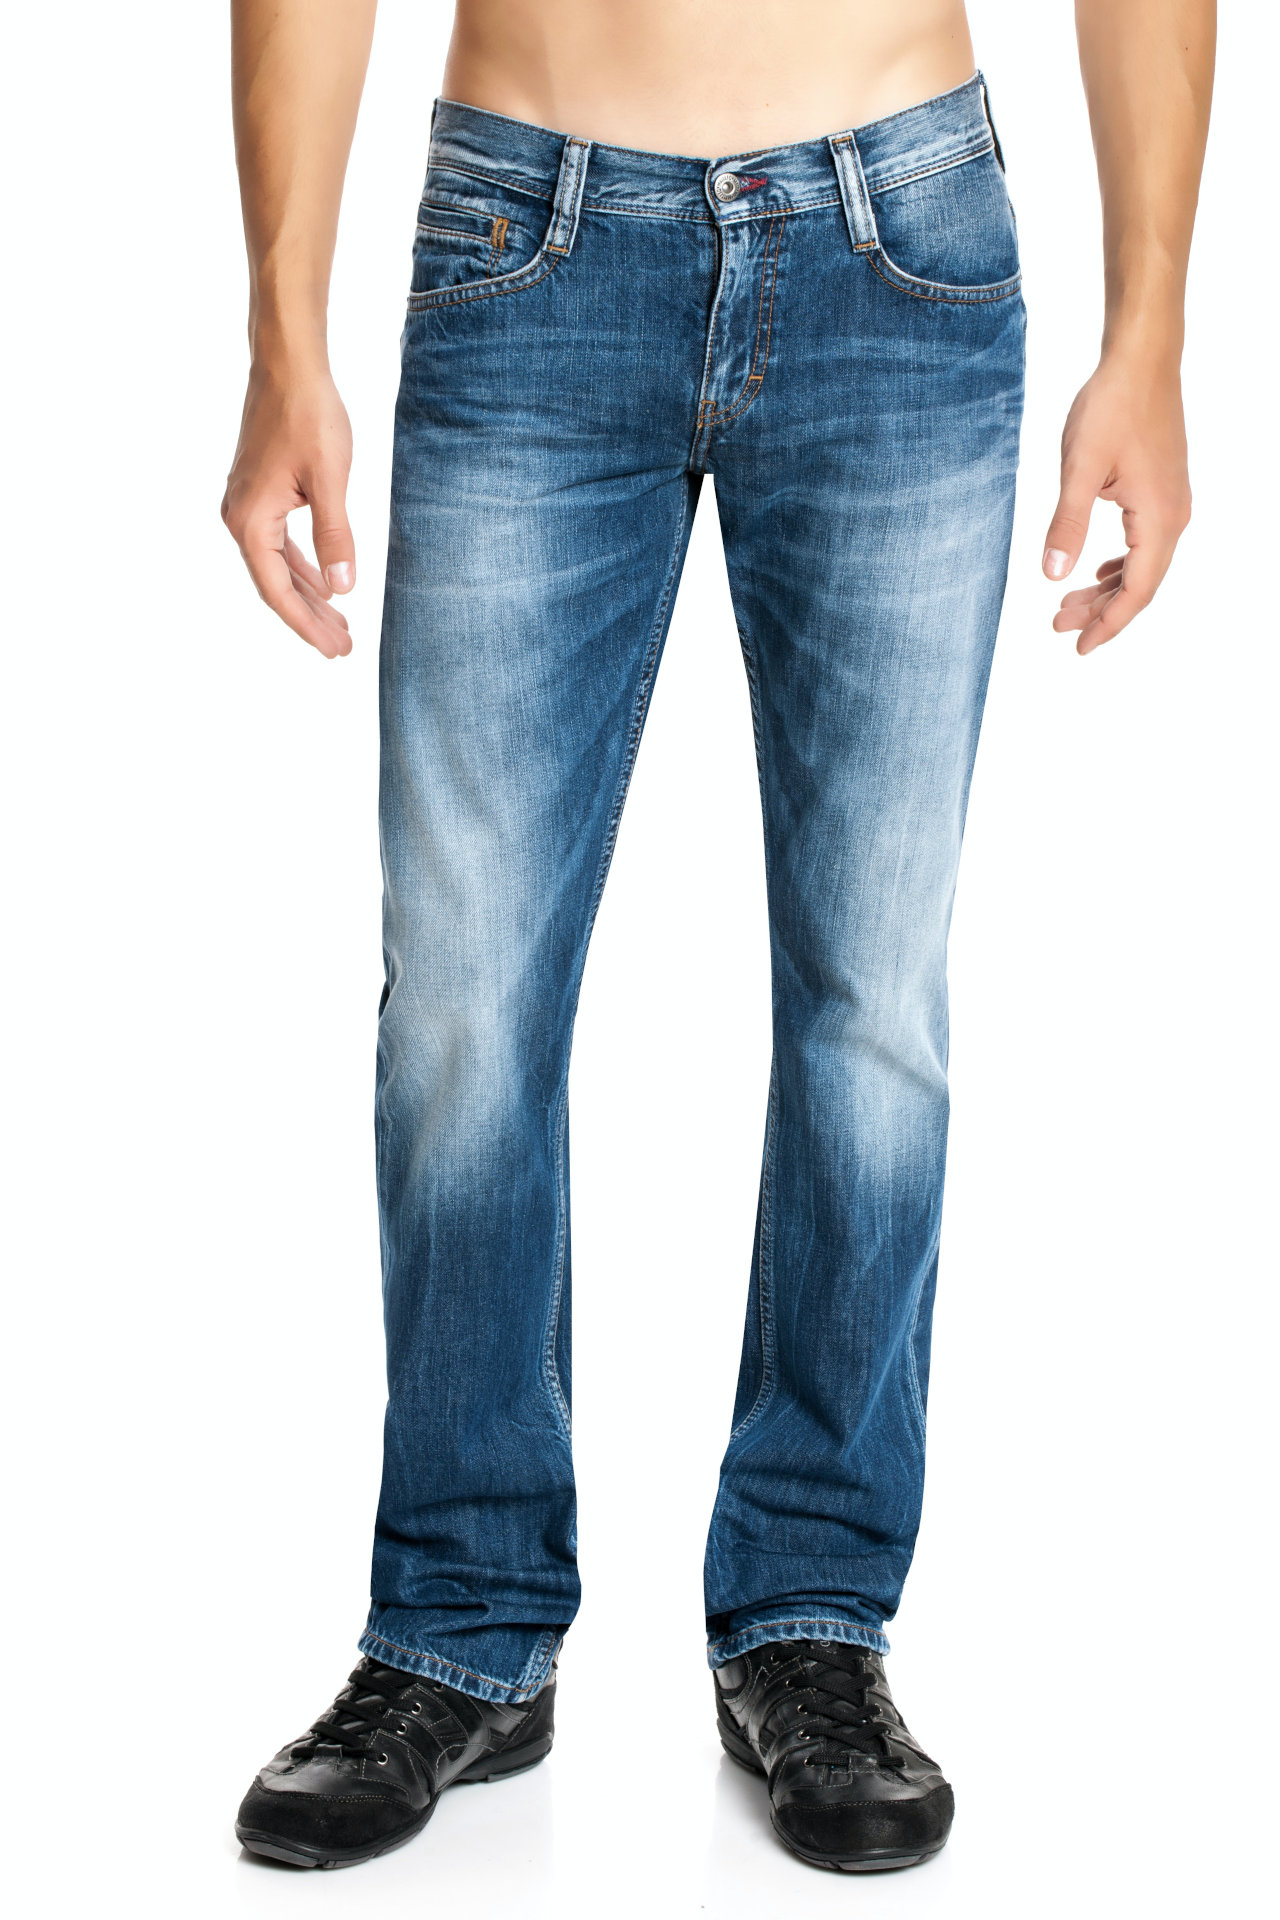 Mustang Jeans Oregon Straight